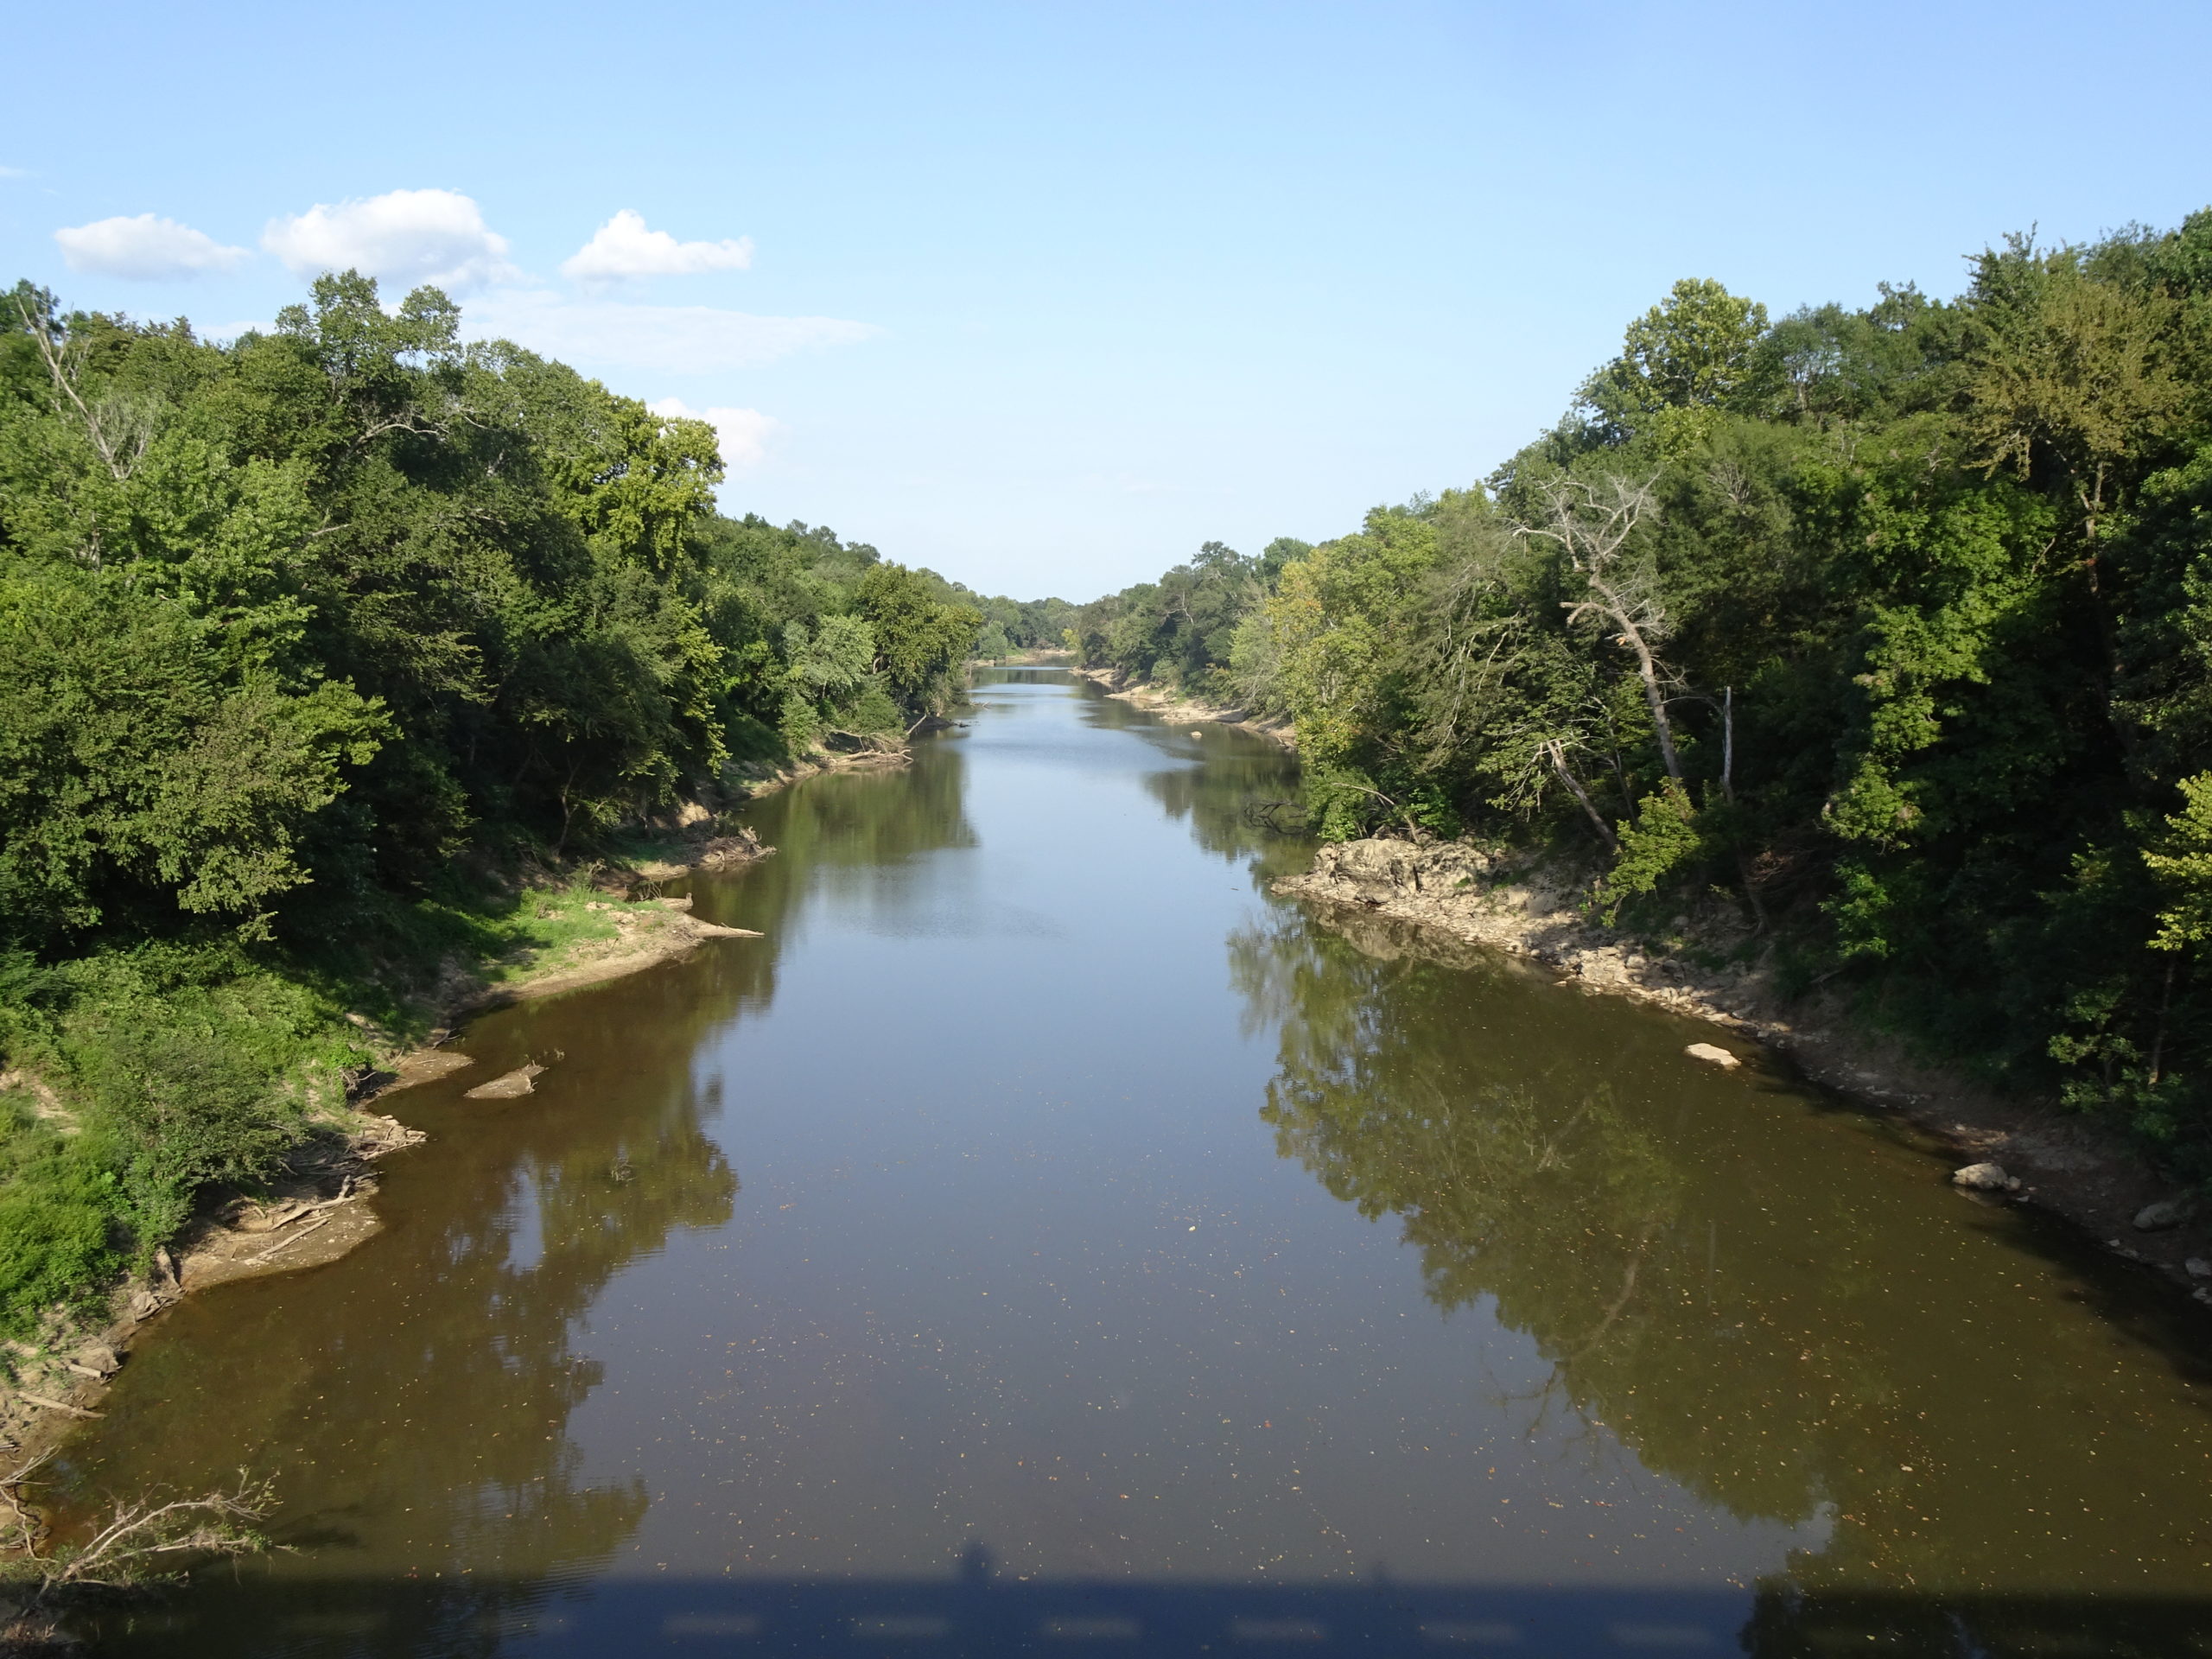 Featured image for the project, Assessing the hydrologic regime of the Kiamichi River to support sustainable management